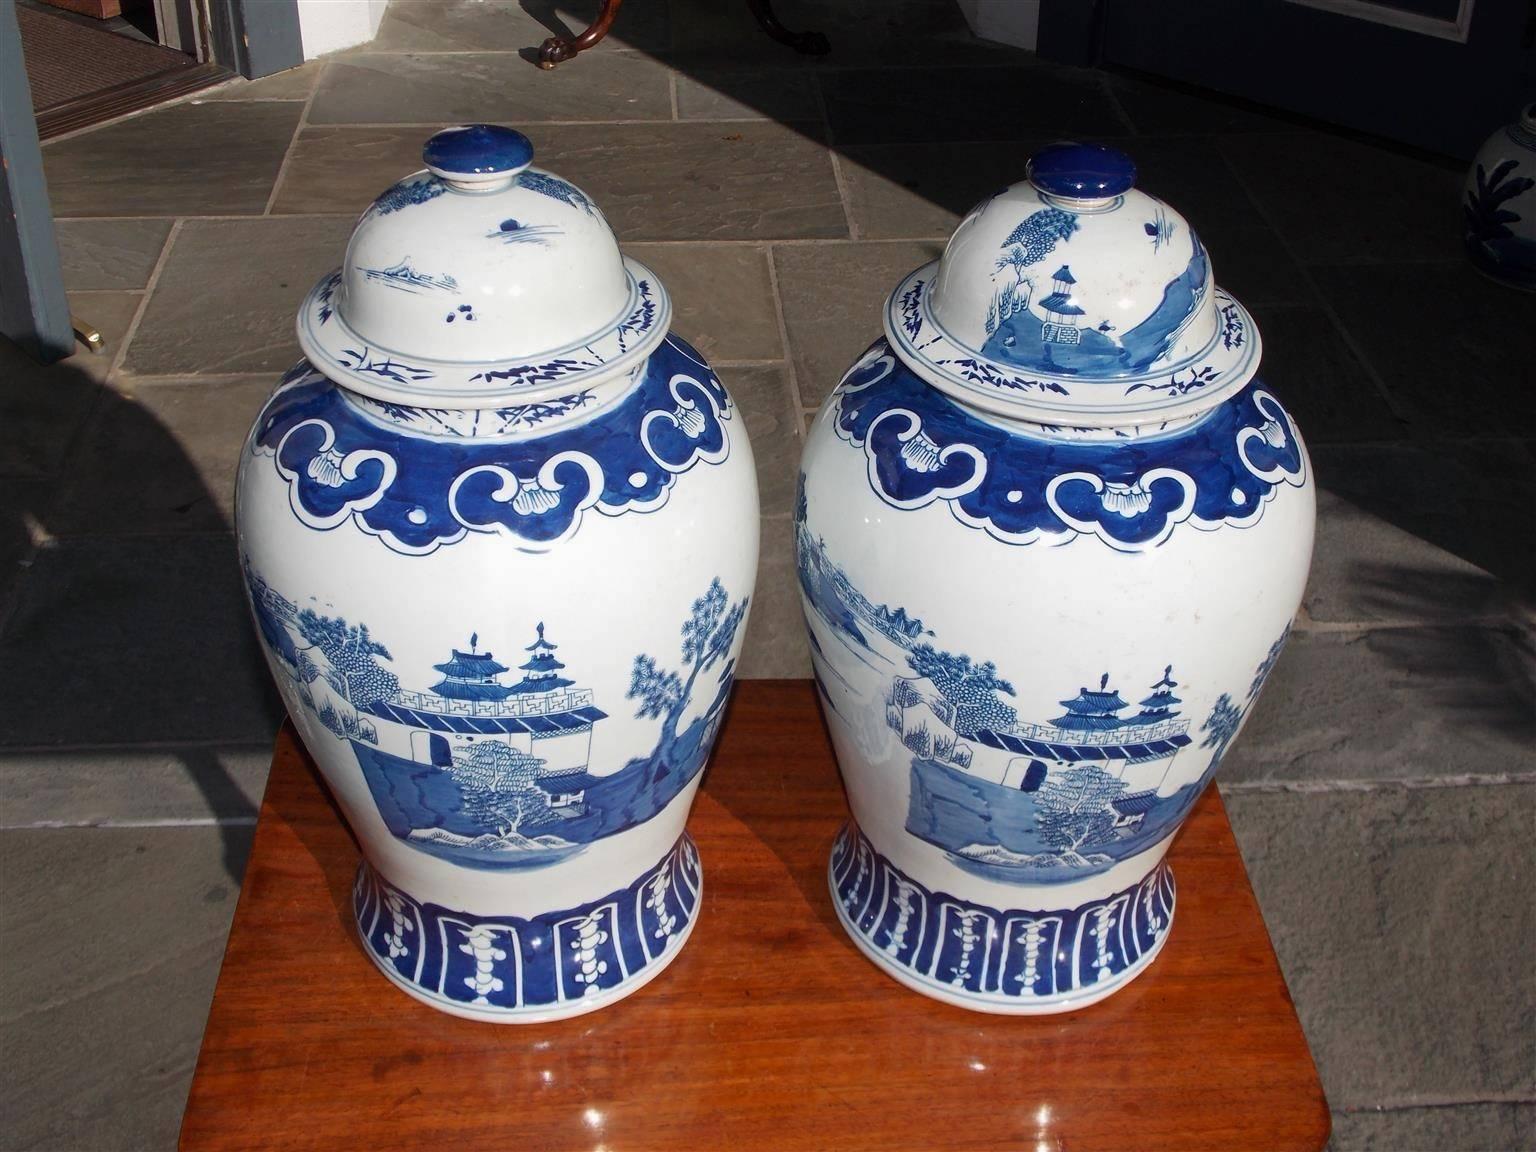 20th Century Pair of Chinese Porcelain Glazed Blue & White Temple Jars with Lids, 20th Cent.